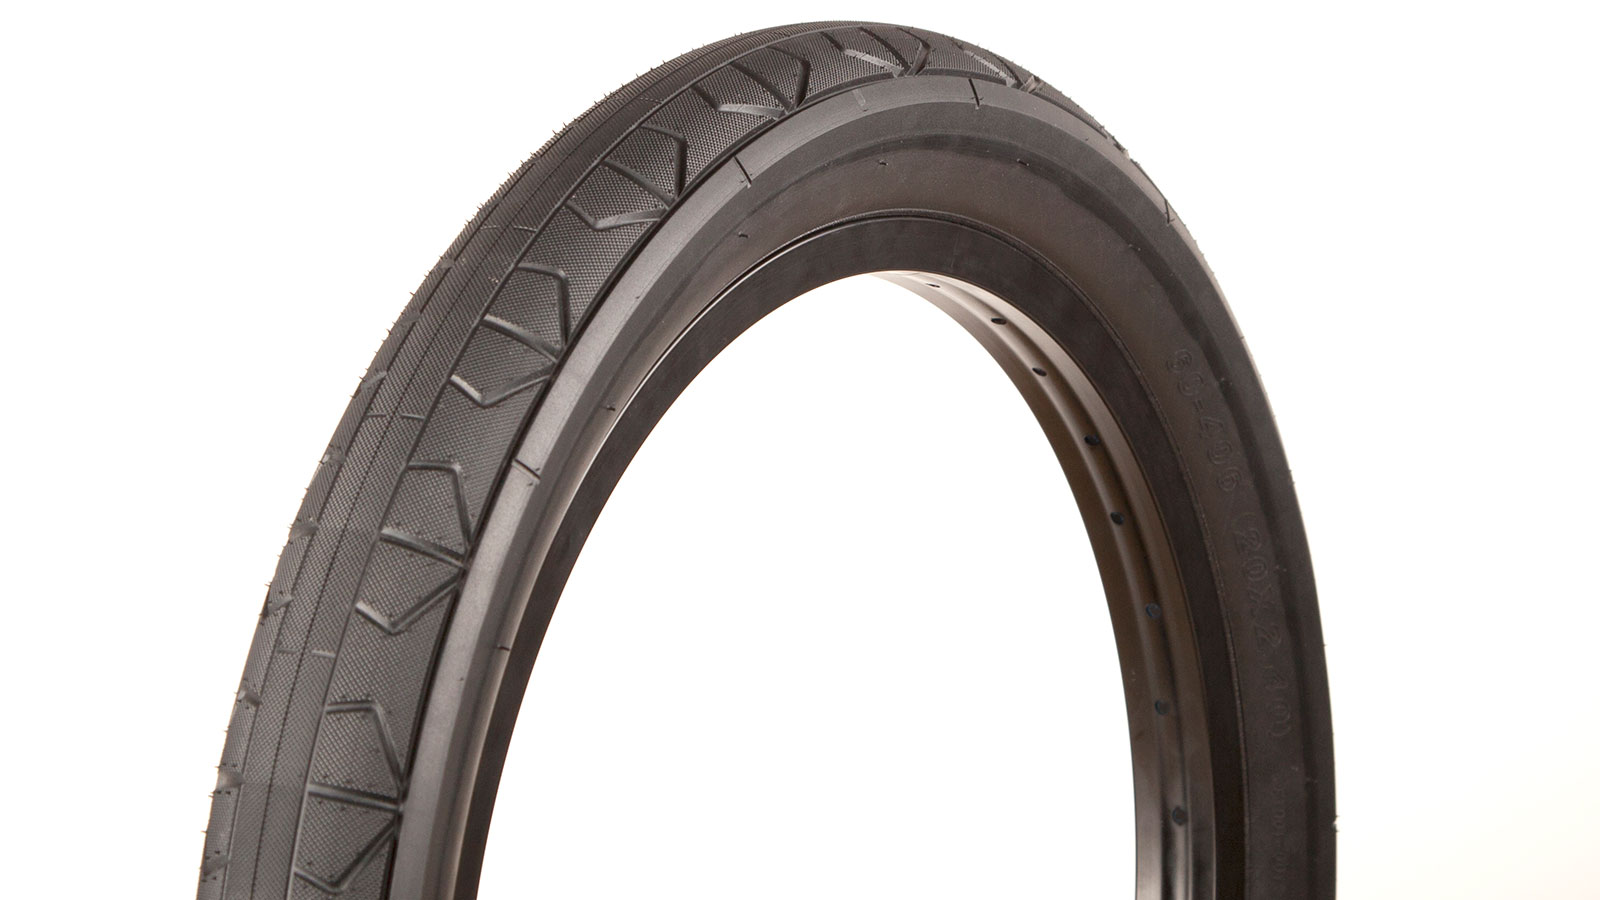 fitbikeco tires